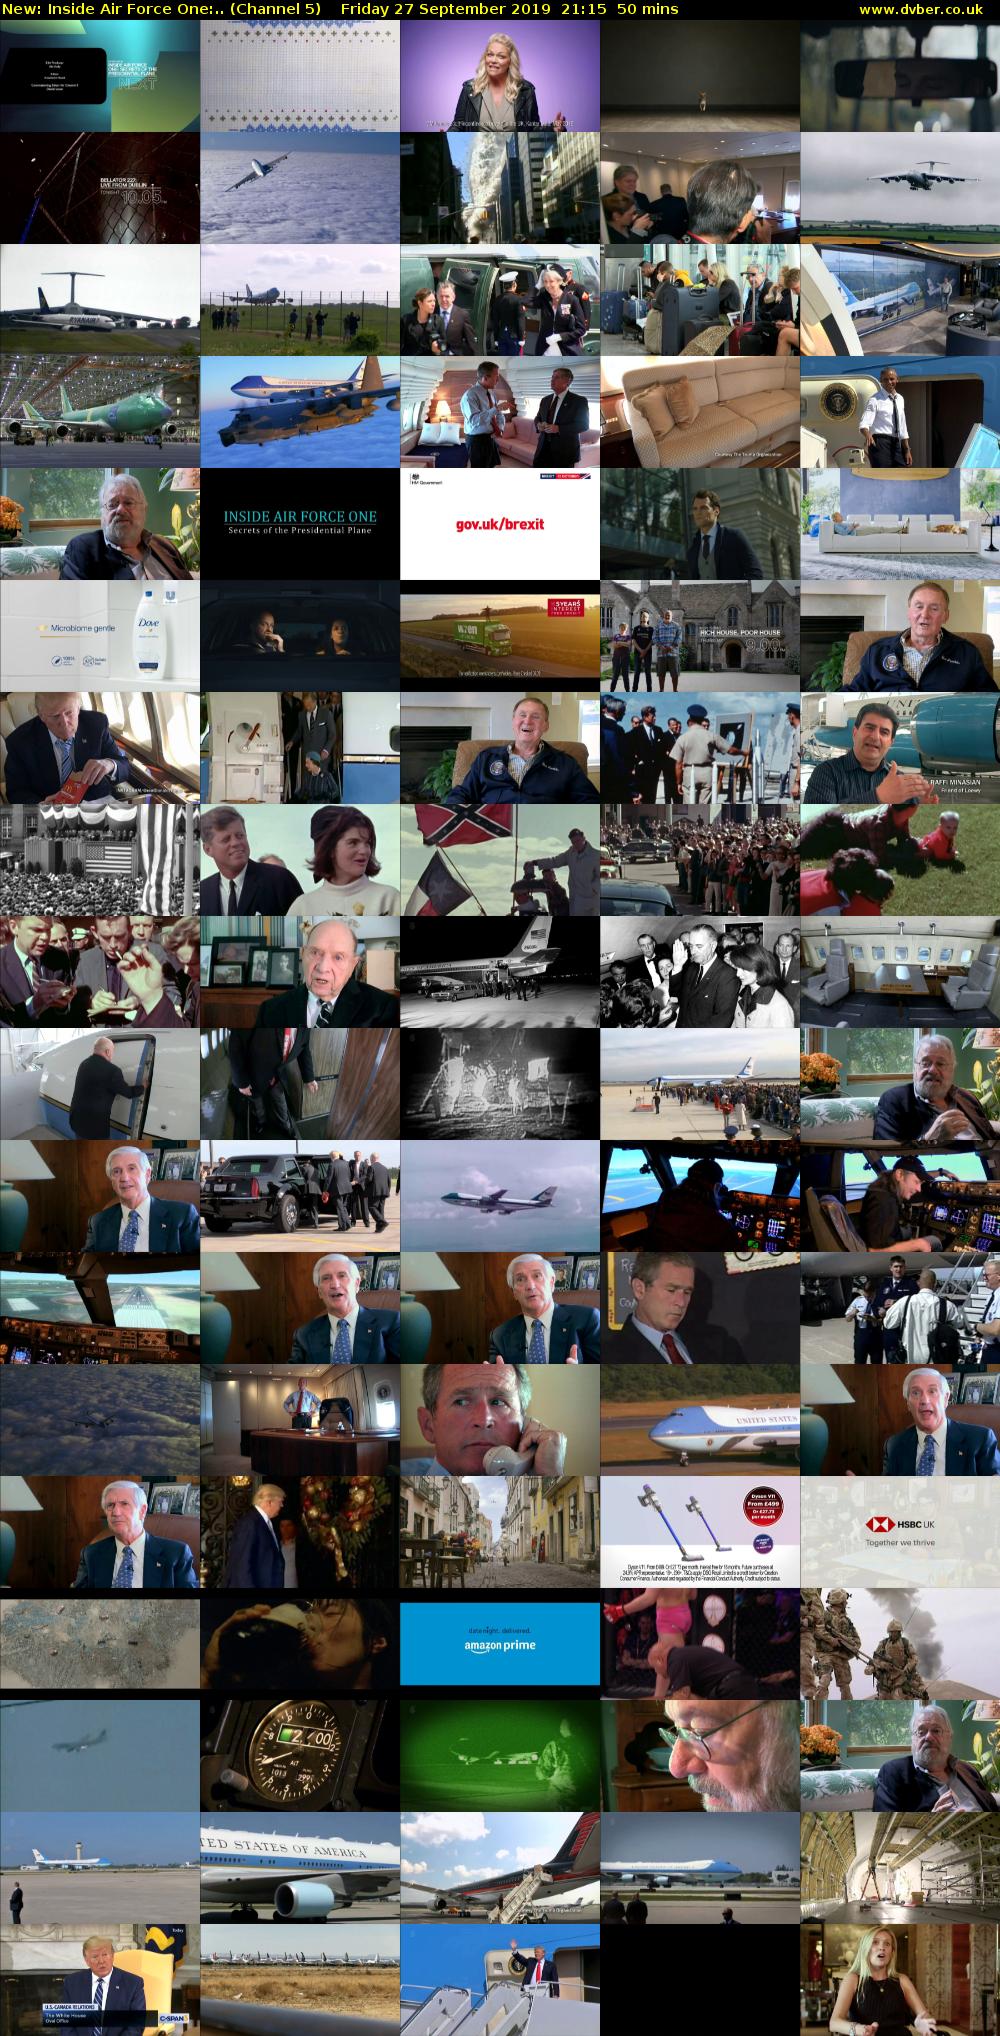 Inside Air Force One:.. (Channel 5) Friday 27 September 2019 21:15 - 22:05